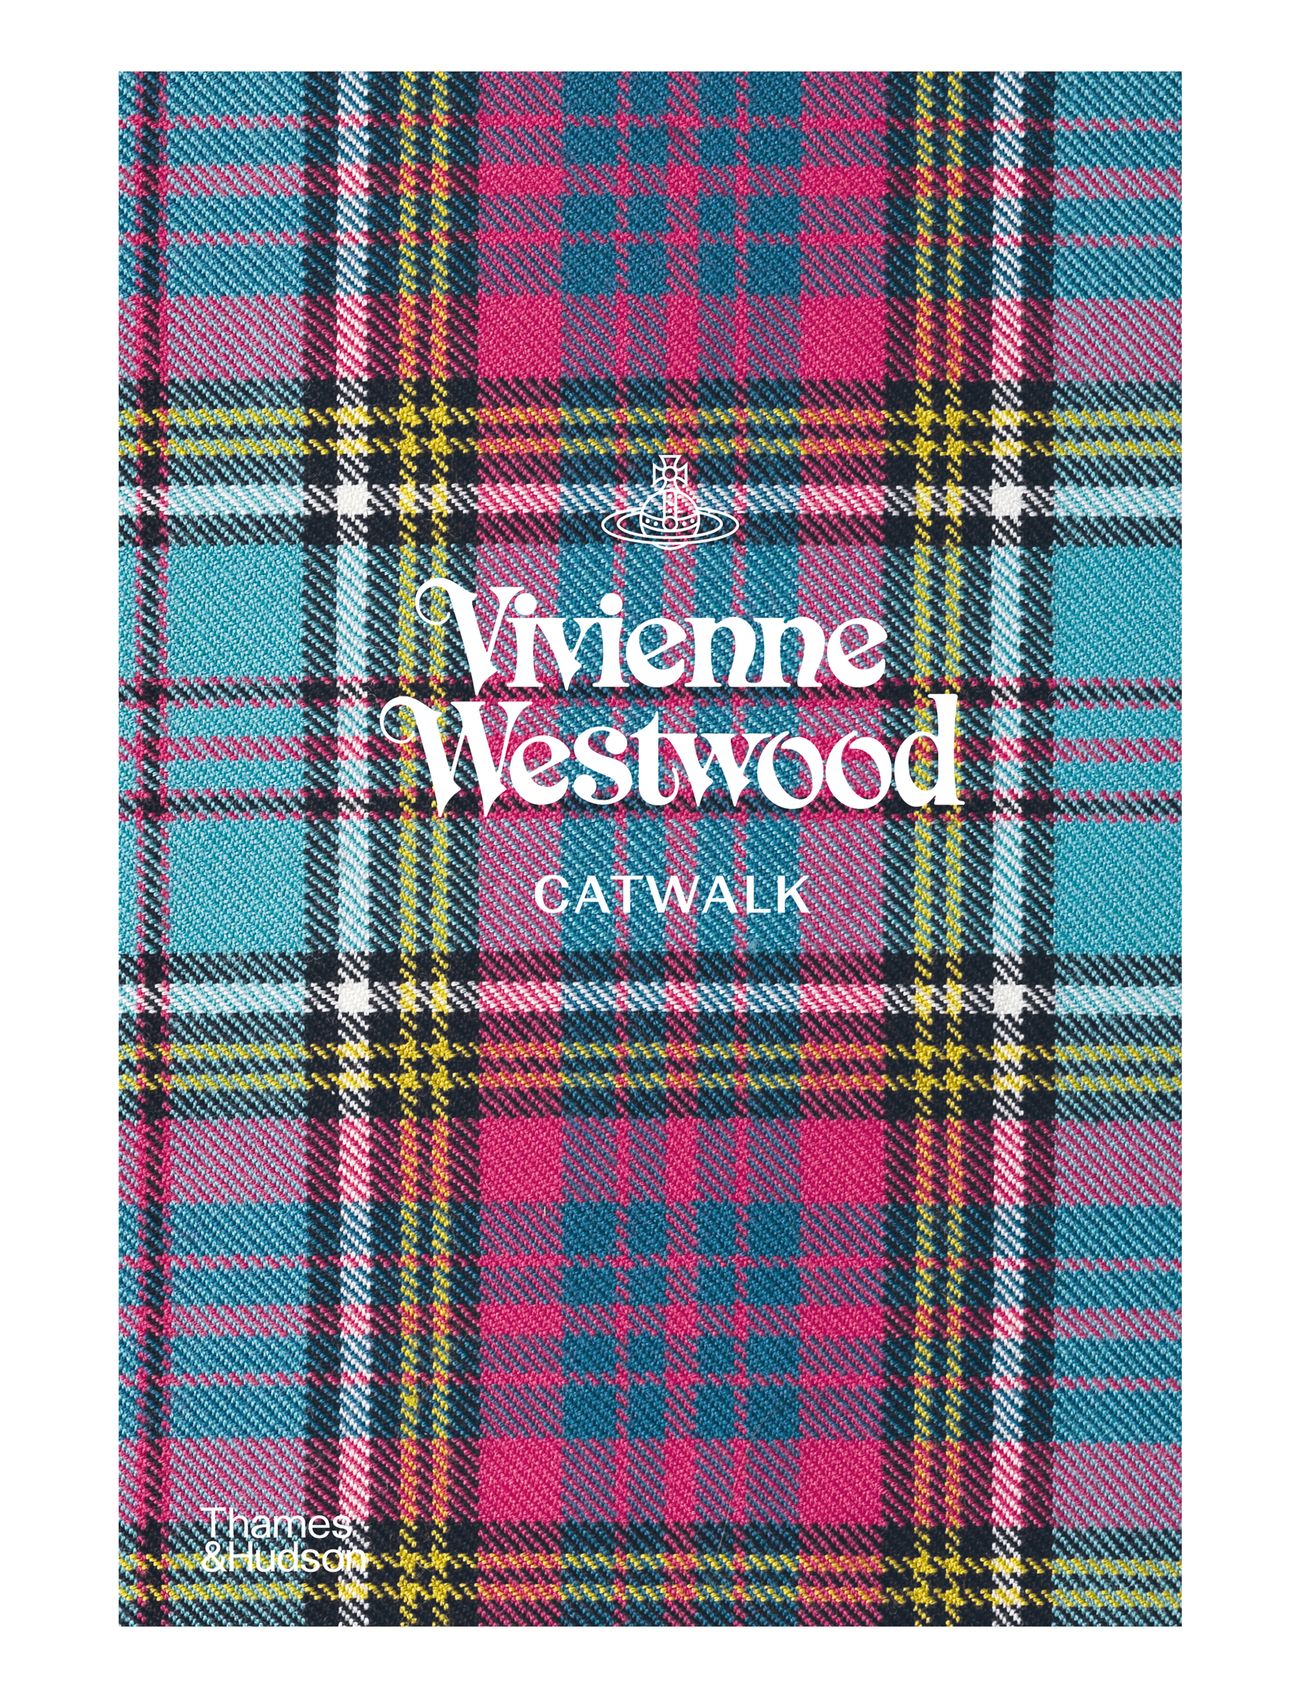 Vivienne Westwood Catwalk Home Decoration Books Multi/patterned New Mags